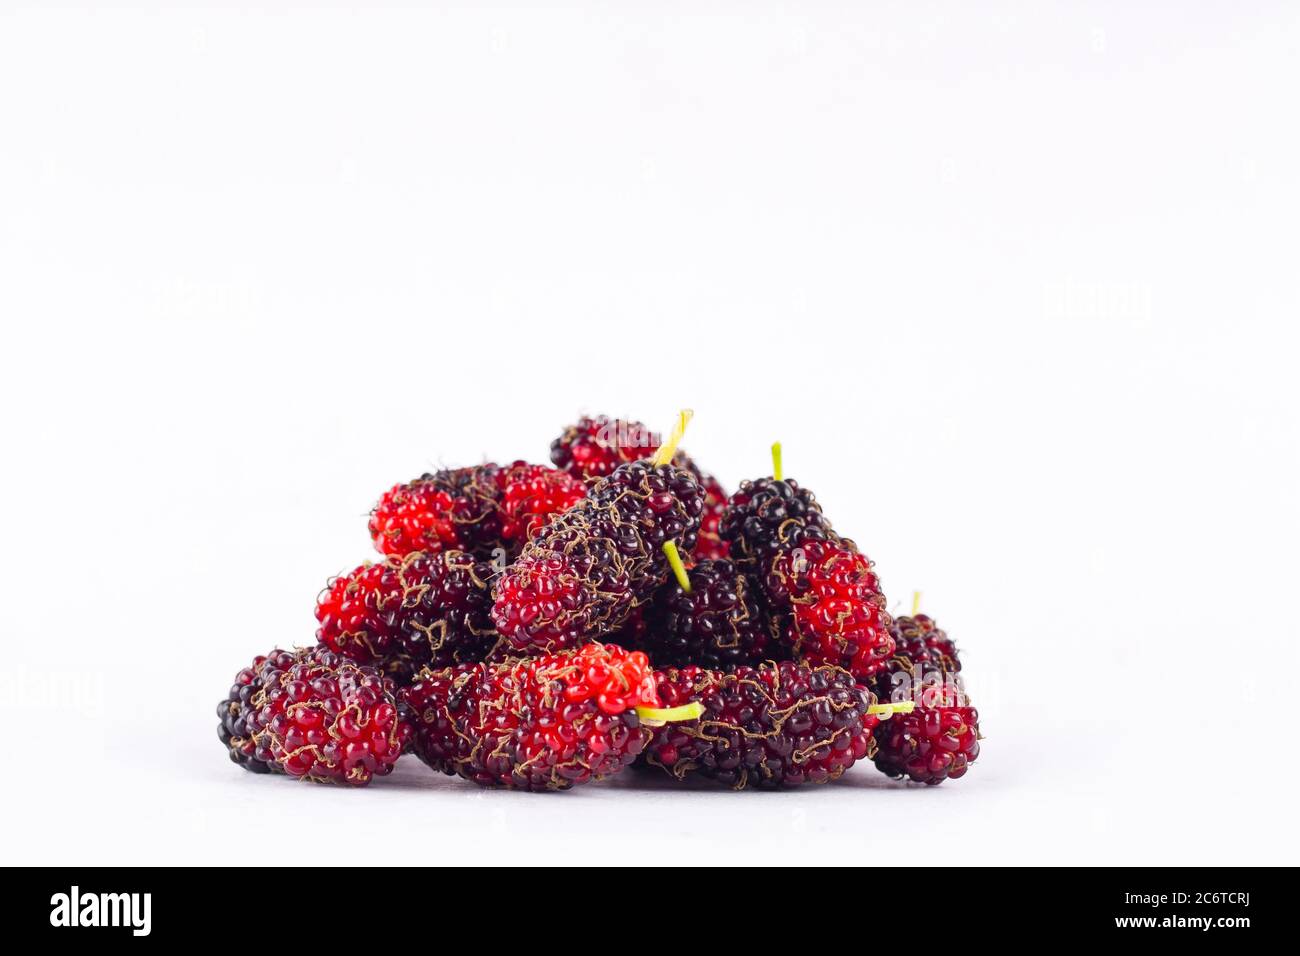 Mulberry is a sweet fruit which It is on white background healthy mulberry fruit food isolated Stock Photo